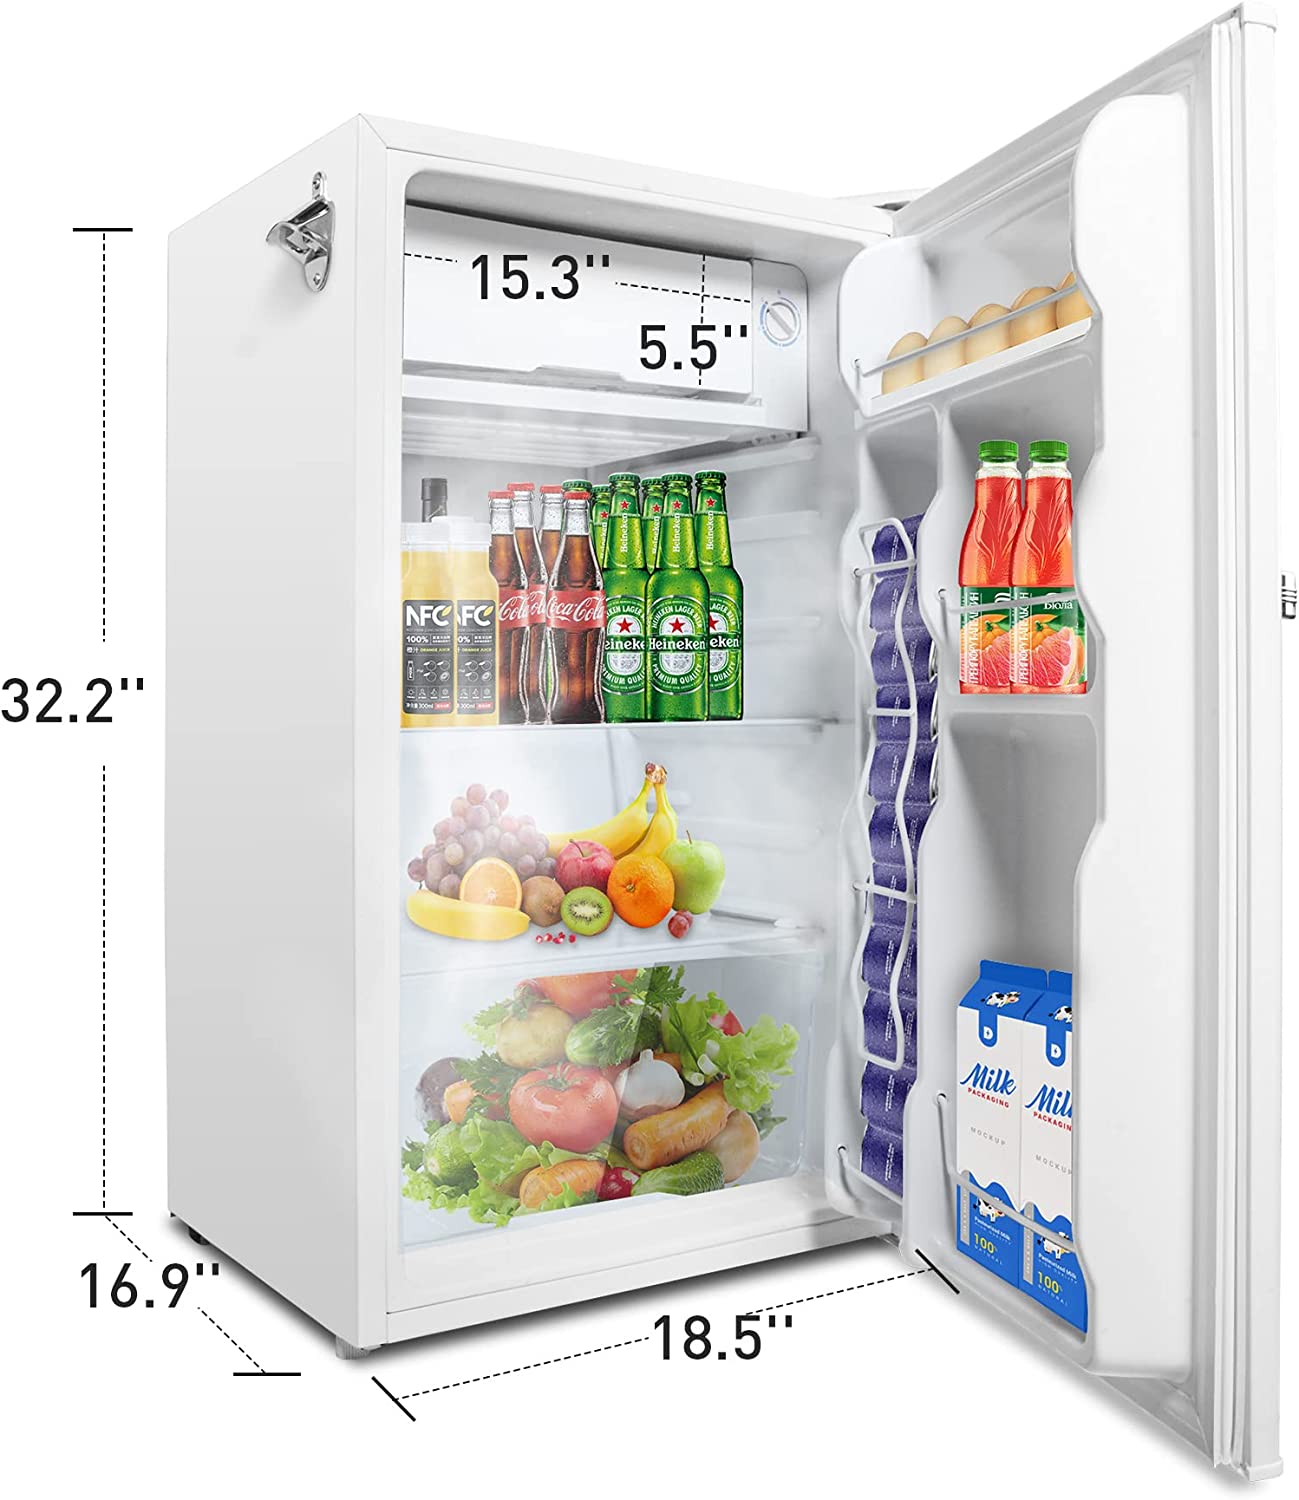 3.2 Cu.Ft Compact Fridge with Freezer, White Single Door Mini Refrigerator with Adjustable Thermostat Control